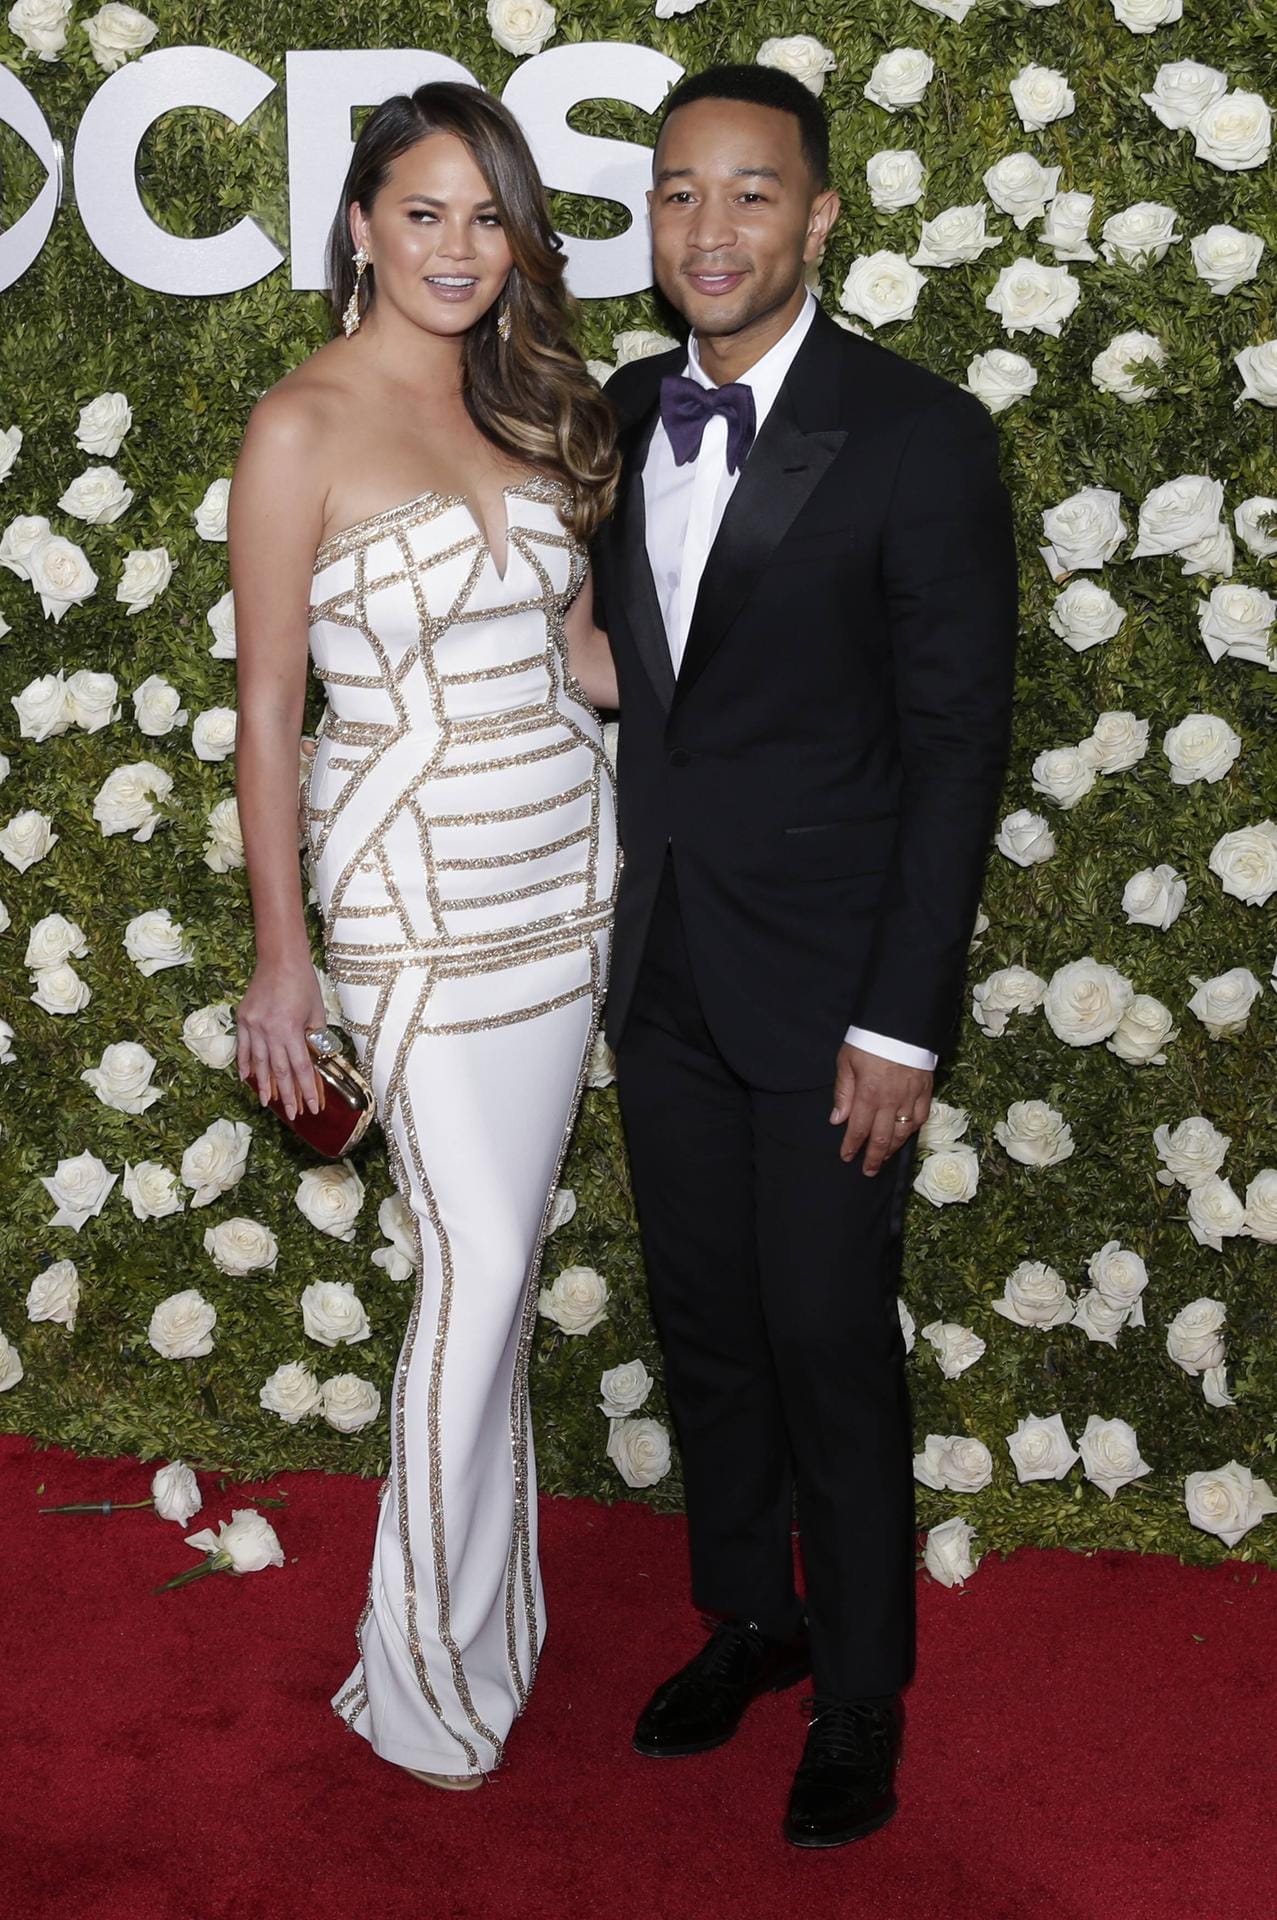 Chrissy Teigen and John Legend arrive on the red carpet at the 71st Annual Tony Awards at Radio City